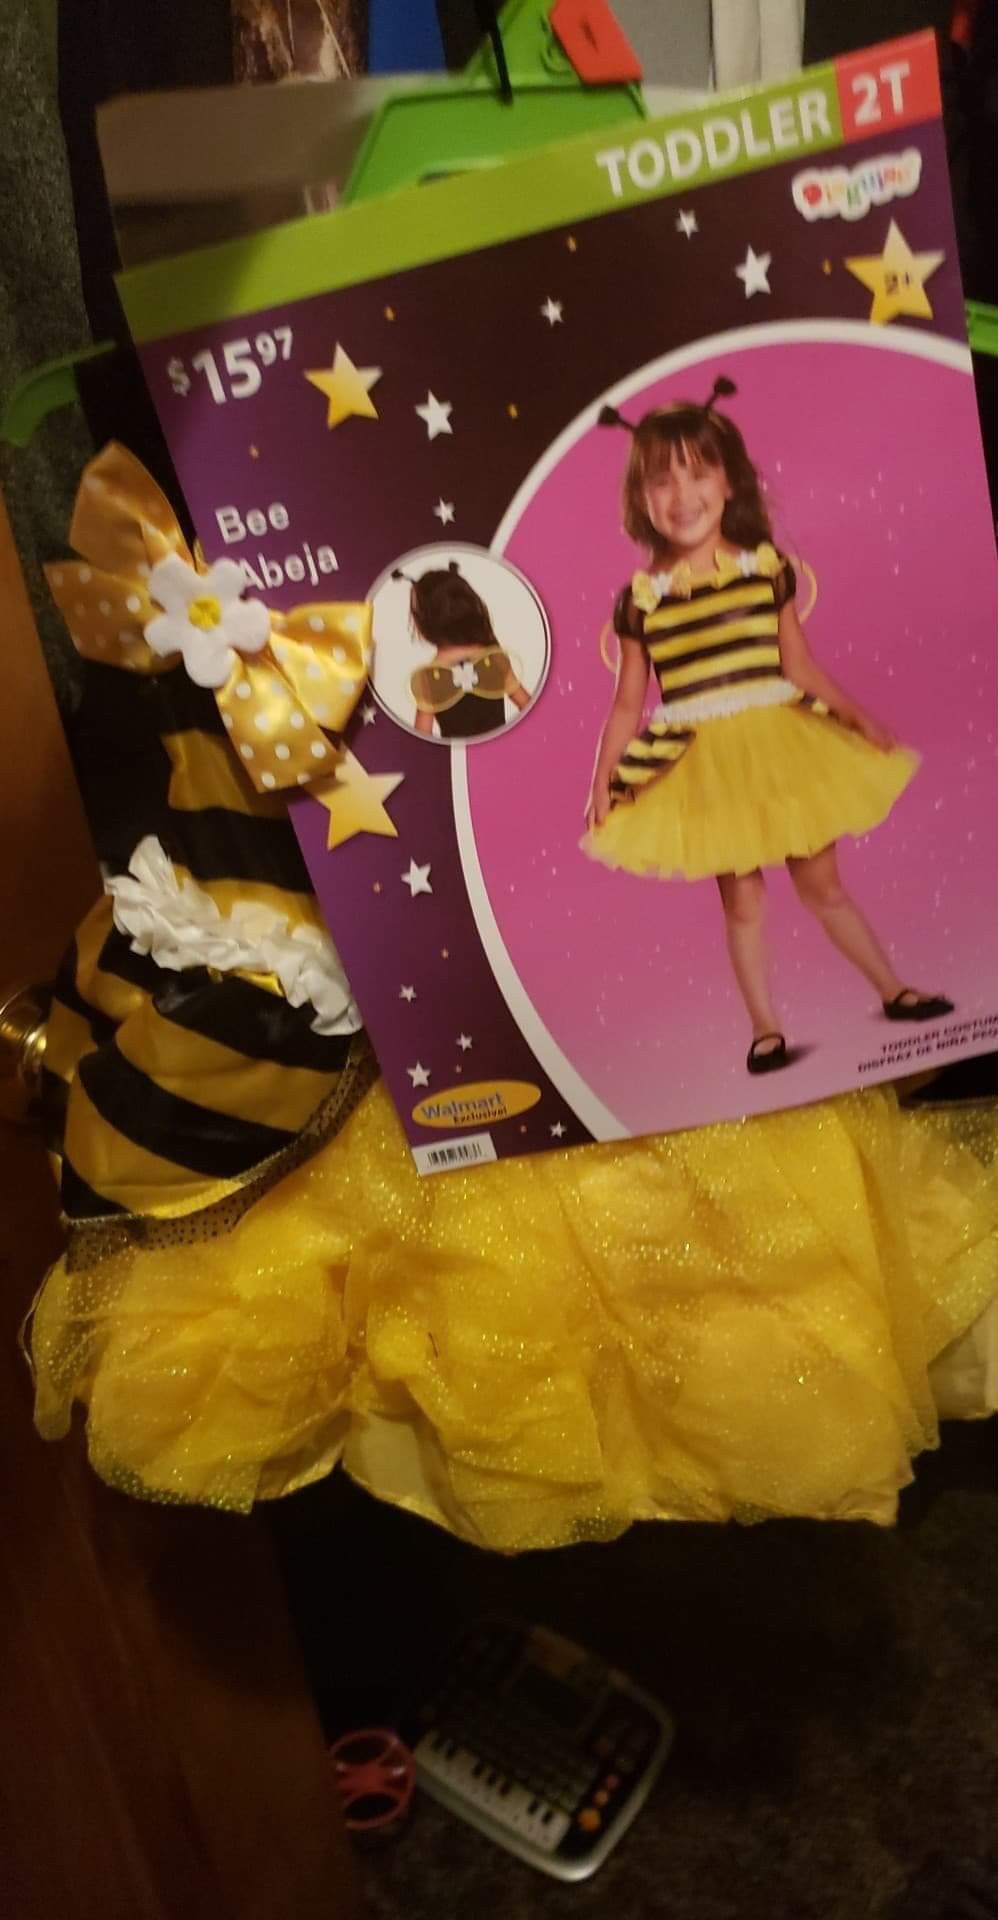 Size 2t costumes